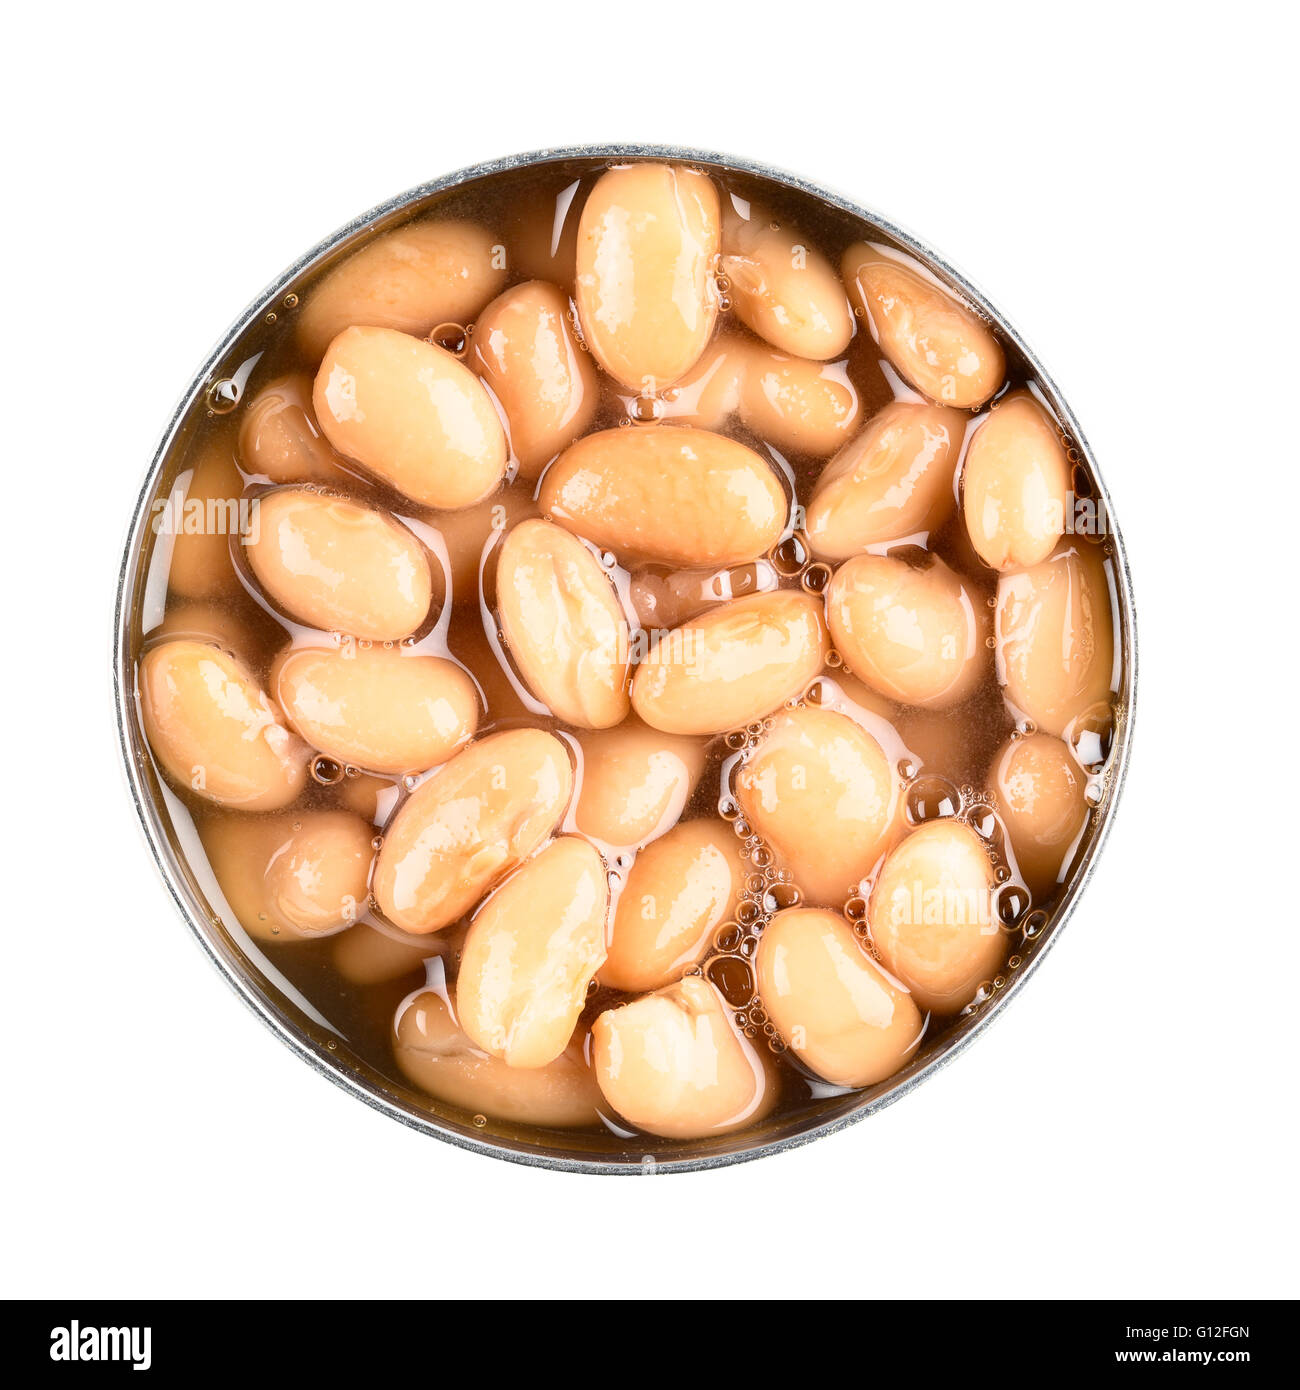 Pinto beans in open can from directly above. Stock Photo